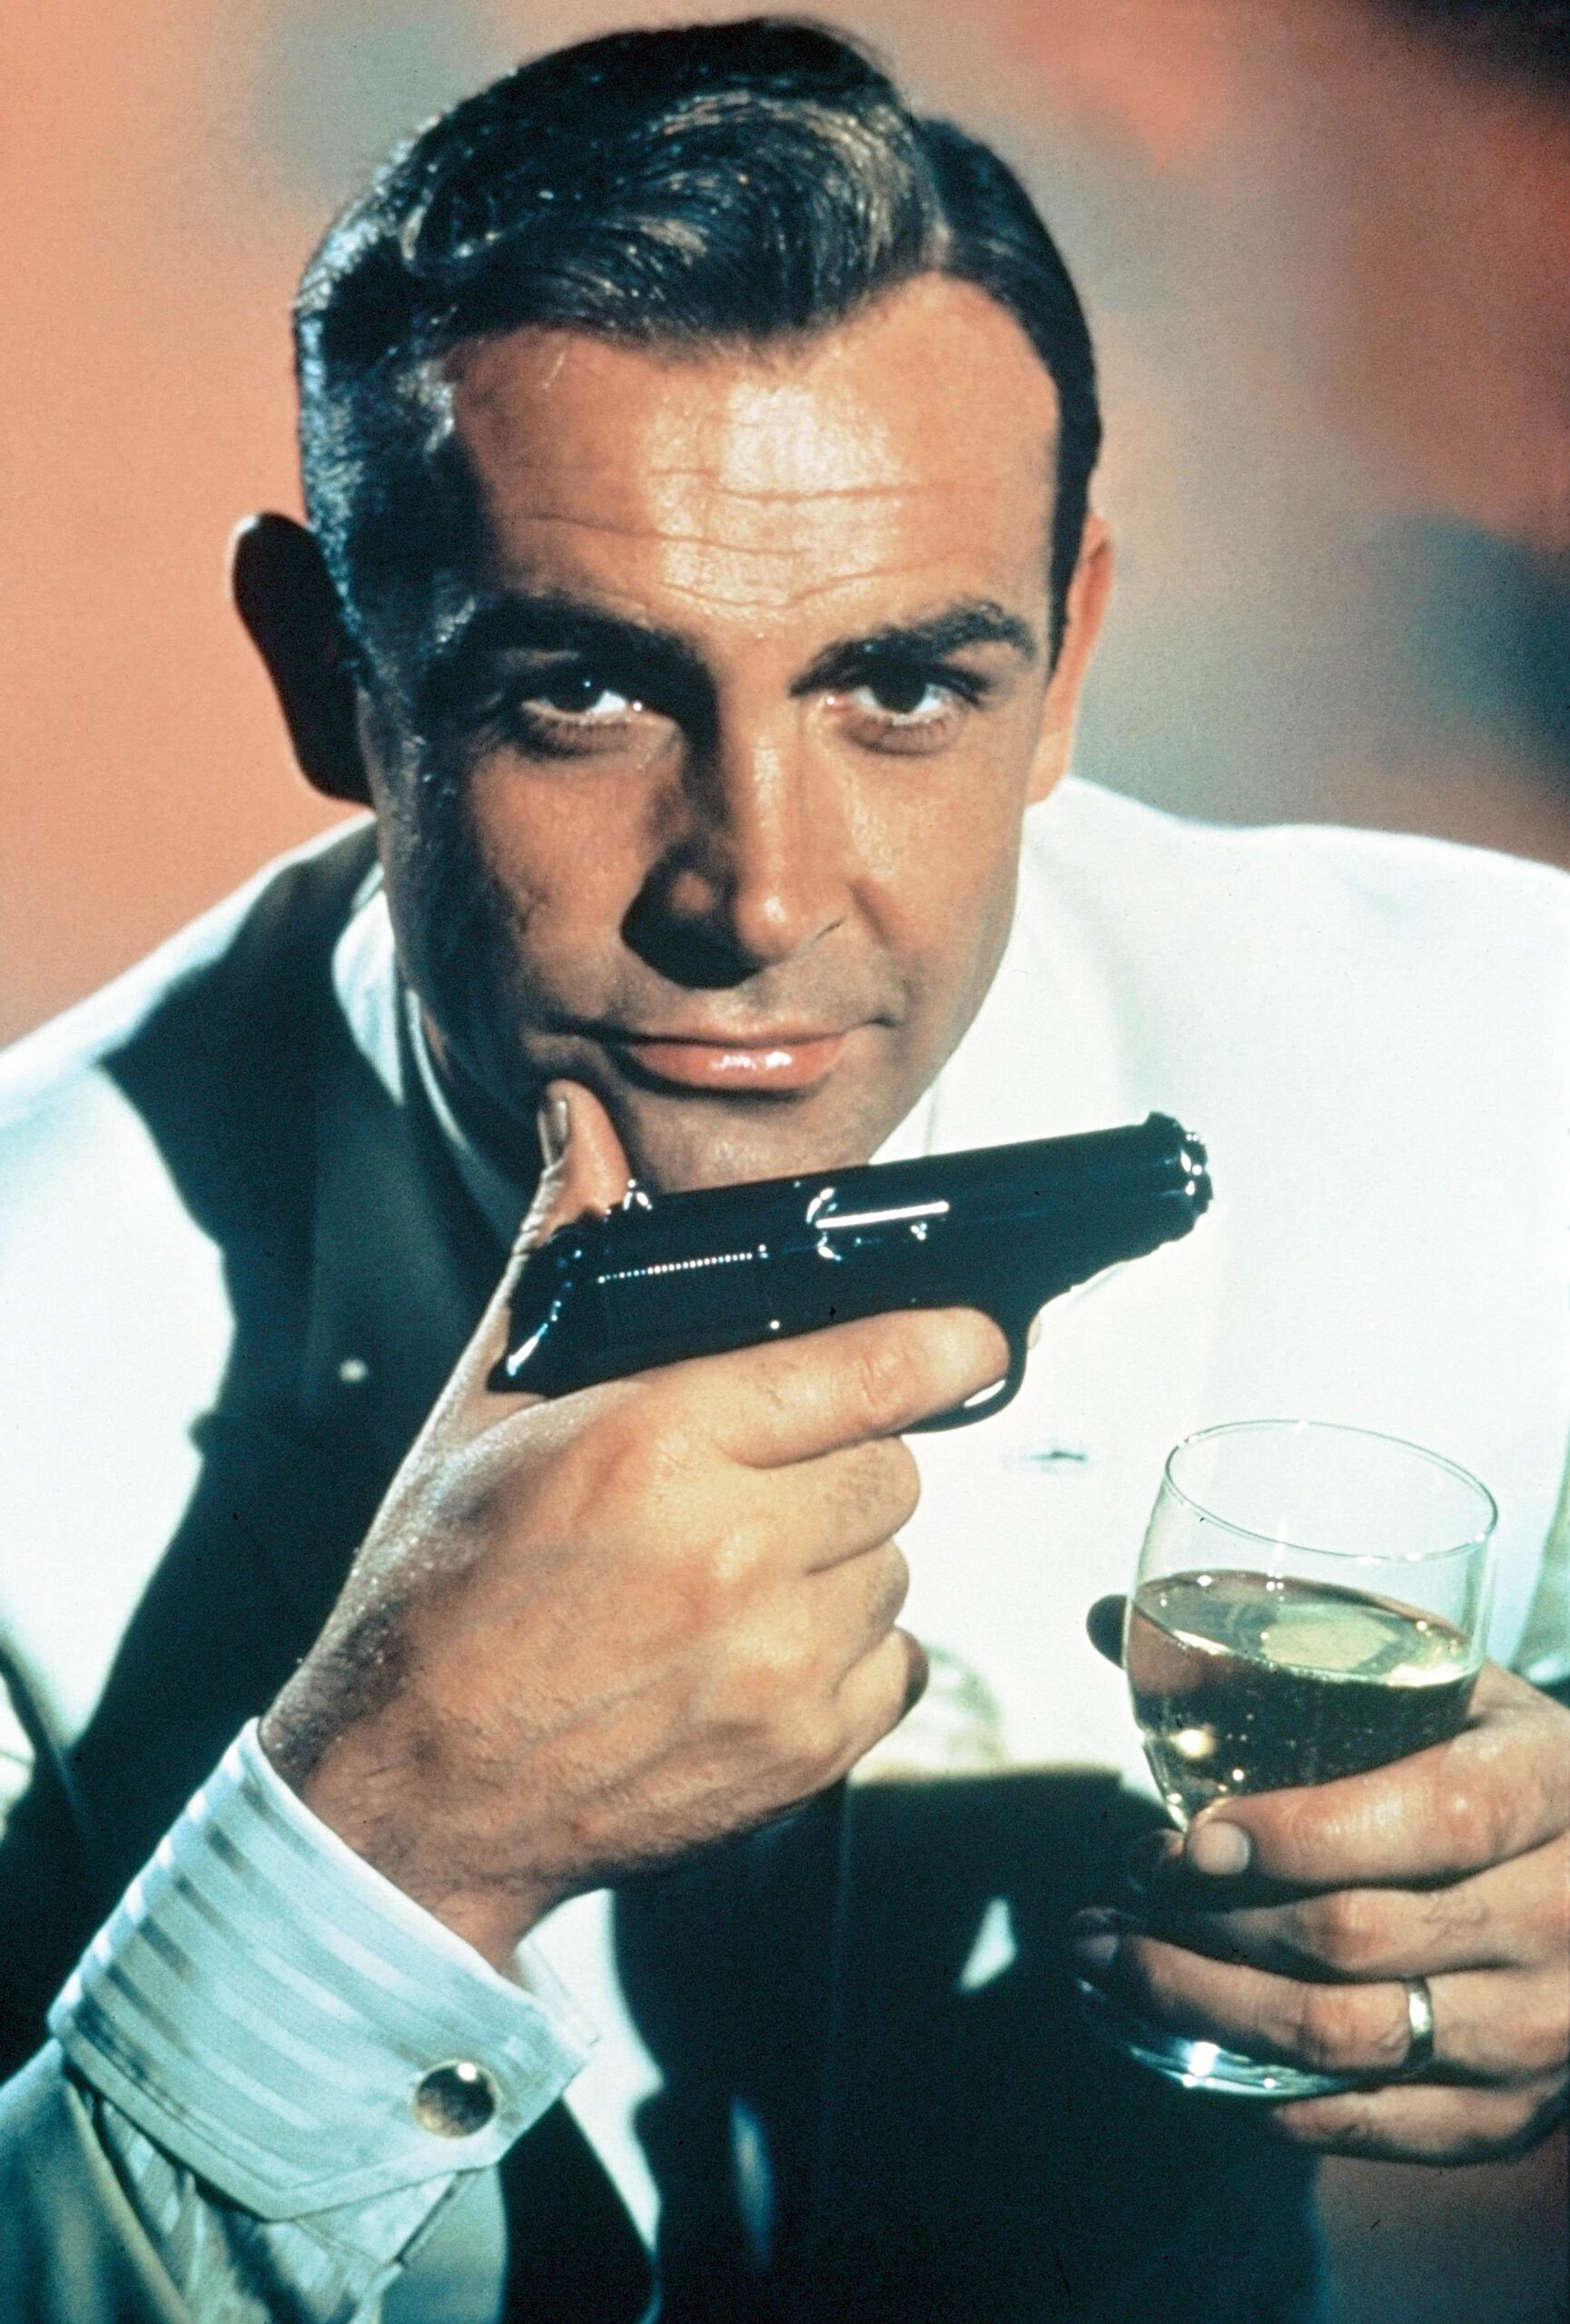 Sean Connery Biography & Wallpapers